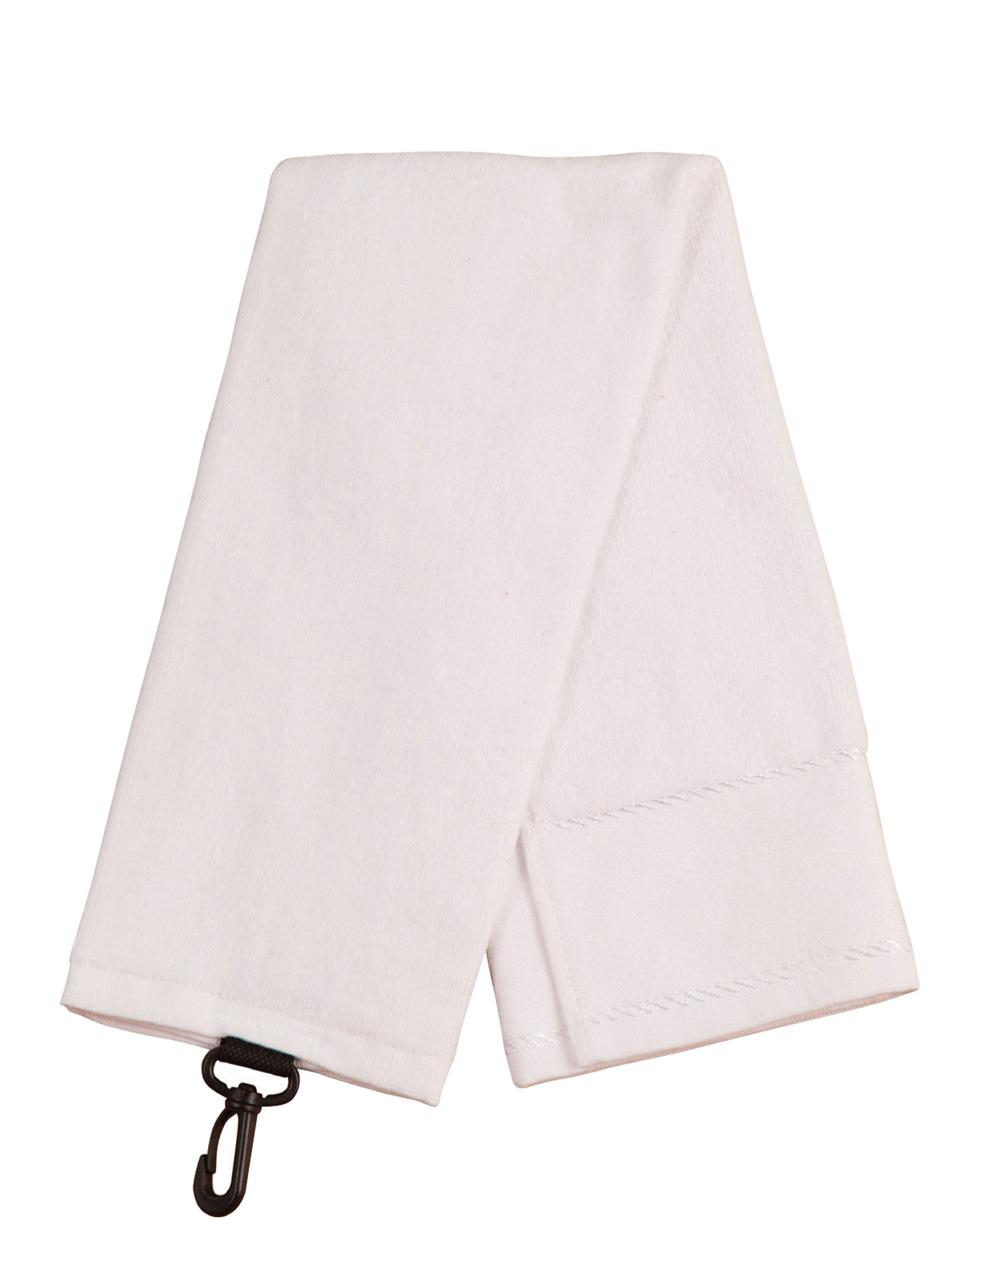 TW06 GOLF TOWEL WITH HOOK - WEARhouse